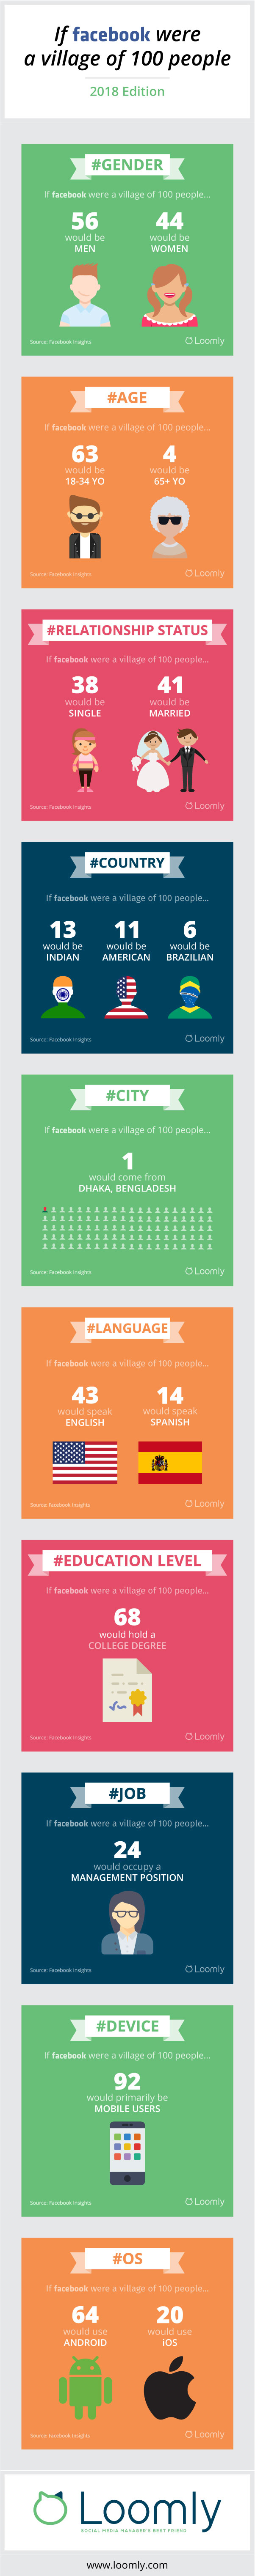 Facebook Infographic If Facebook Were A Village Of 100 People 2018 Edition